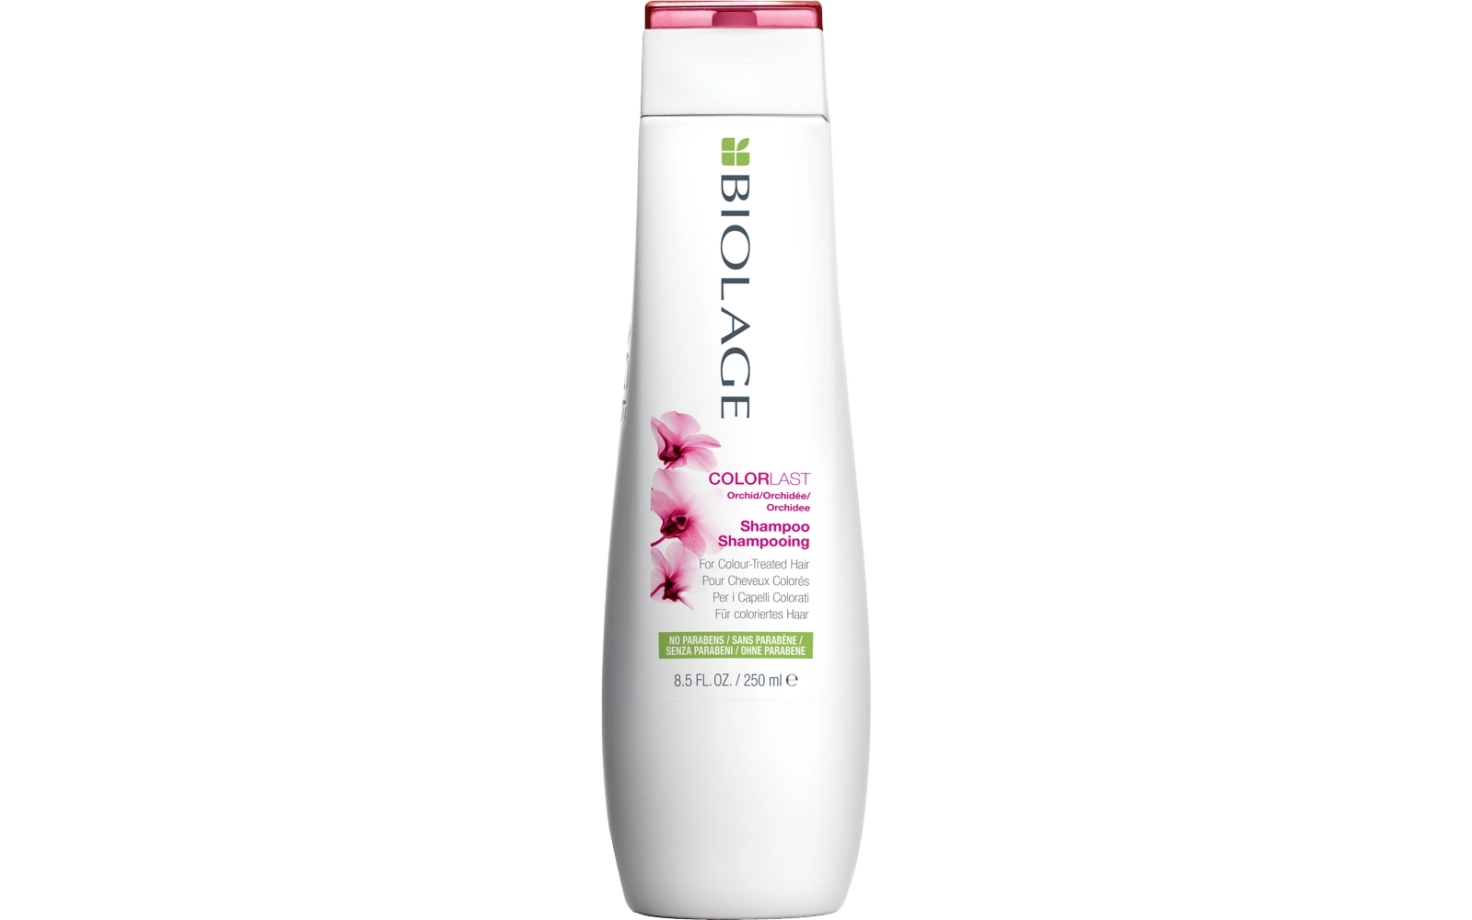 9. "Biolage Colorlast Shampoo for Color-Treated Hair" - wide 8